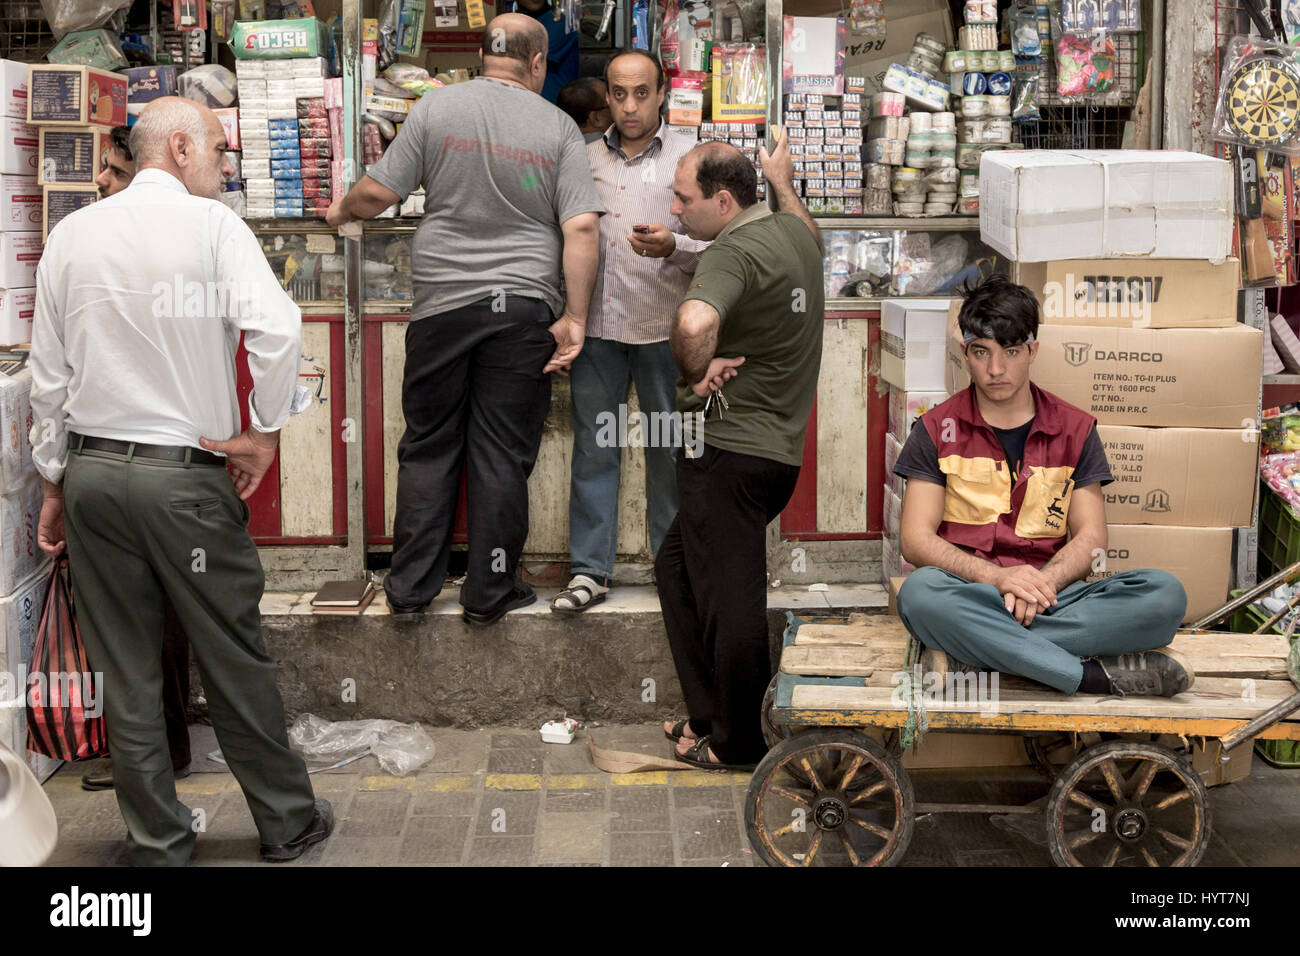 TEHRAN, IRAN - AUGUST 14, 2016: Merchants and delivery boys having a break and discussing in a covered street of Tehran bazaar   Old and young iranian Stock Photo